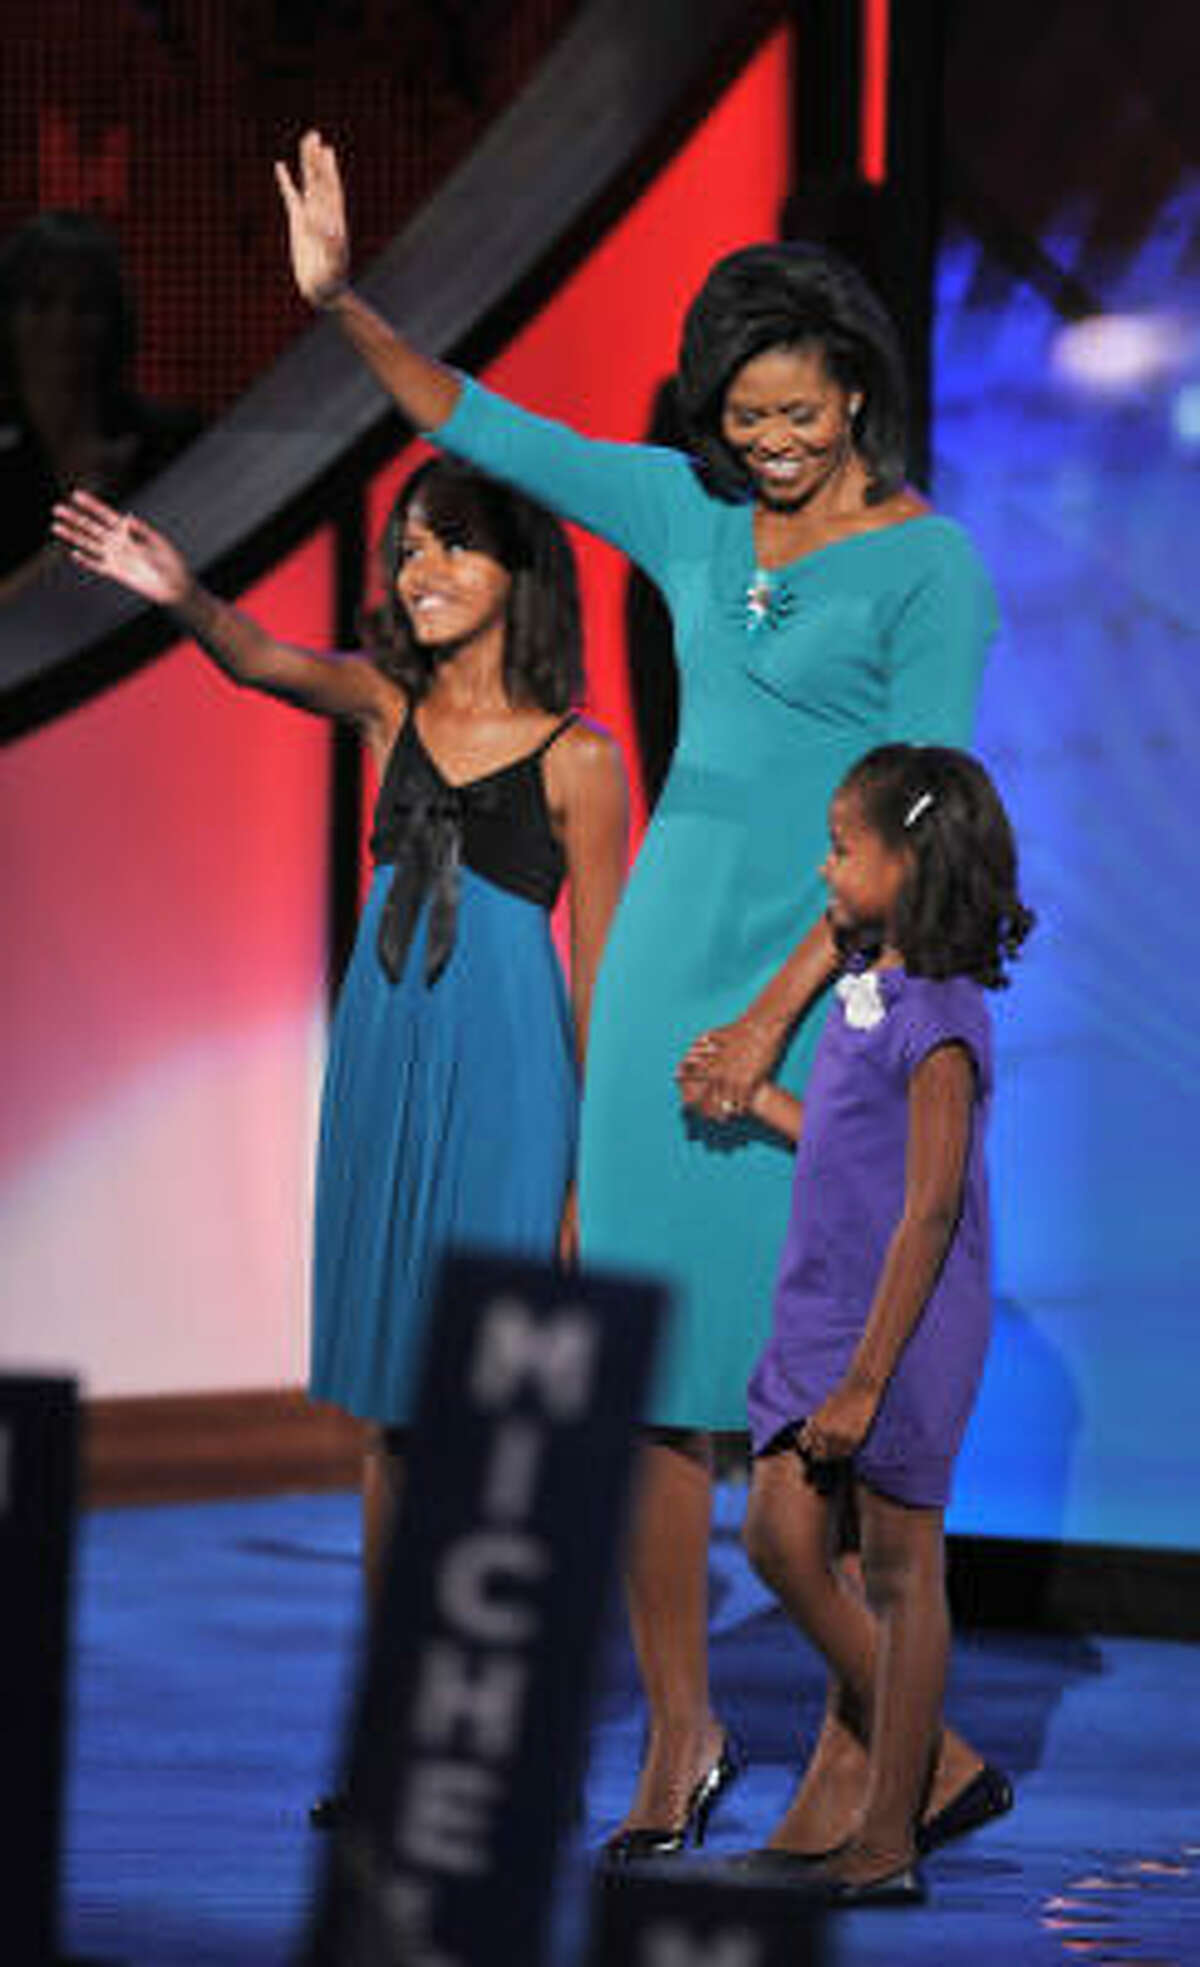 Michelle Obama, wife of US Democratic presidential candidate Barack Obama, brings daughters Malia, left, and Sasha on stage after her speech.